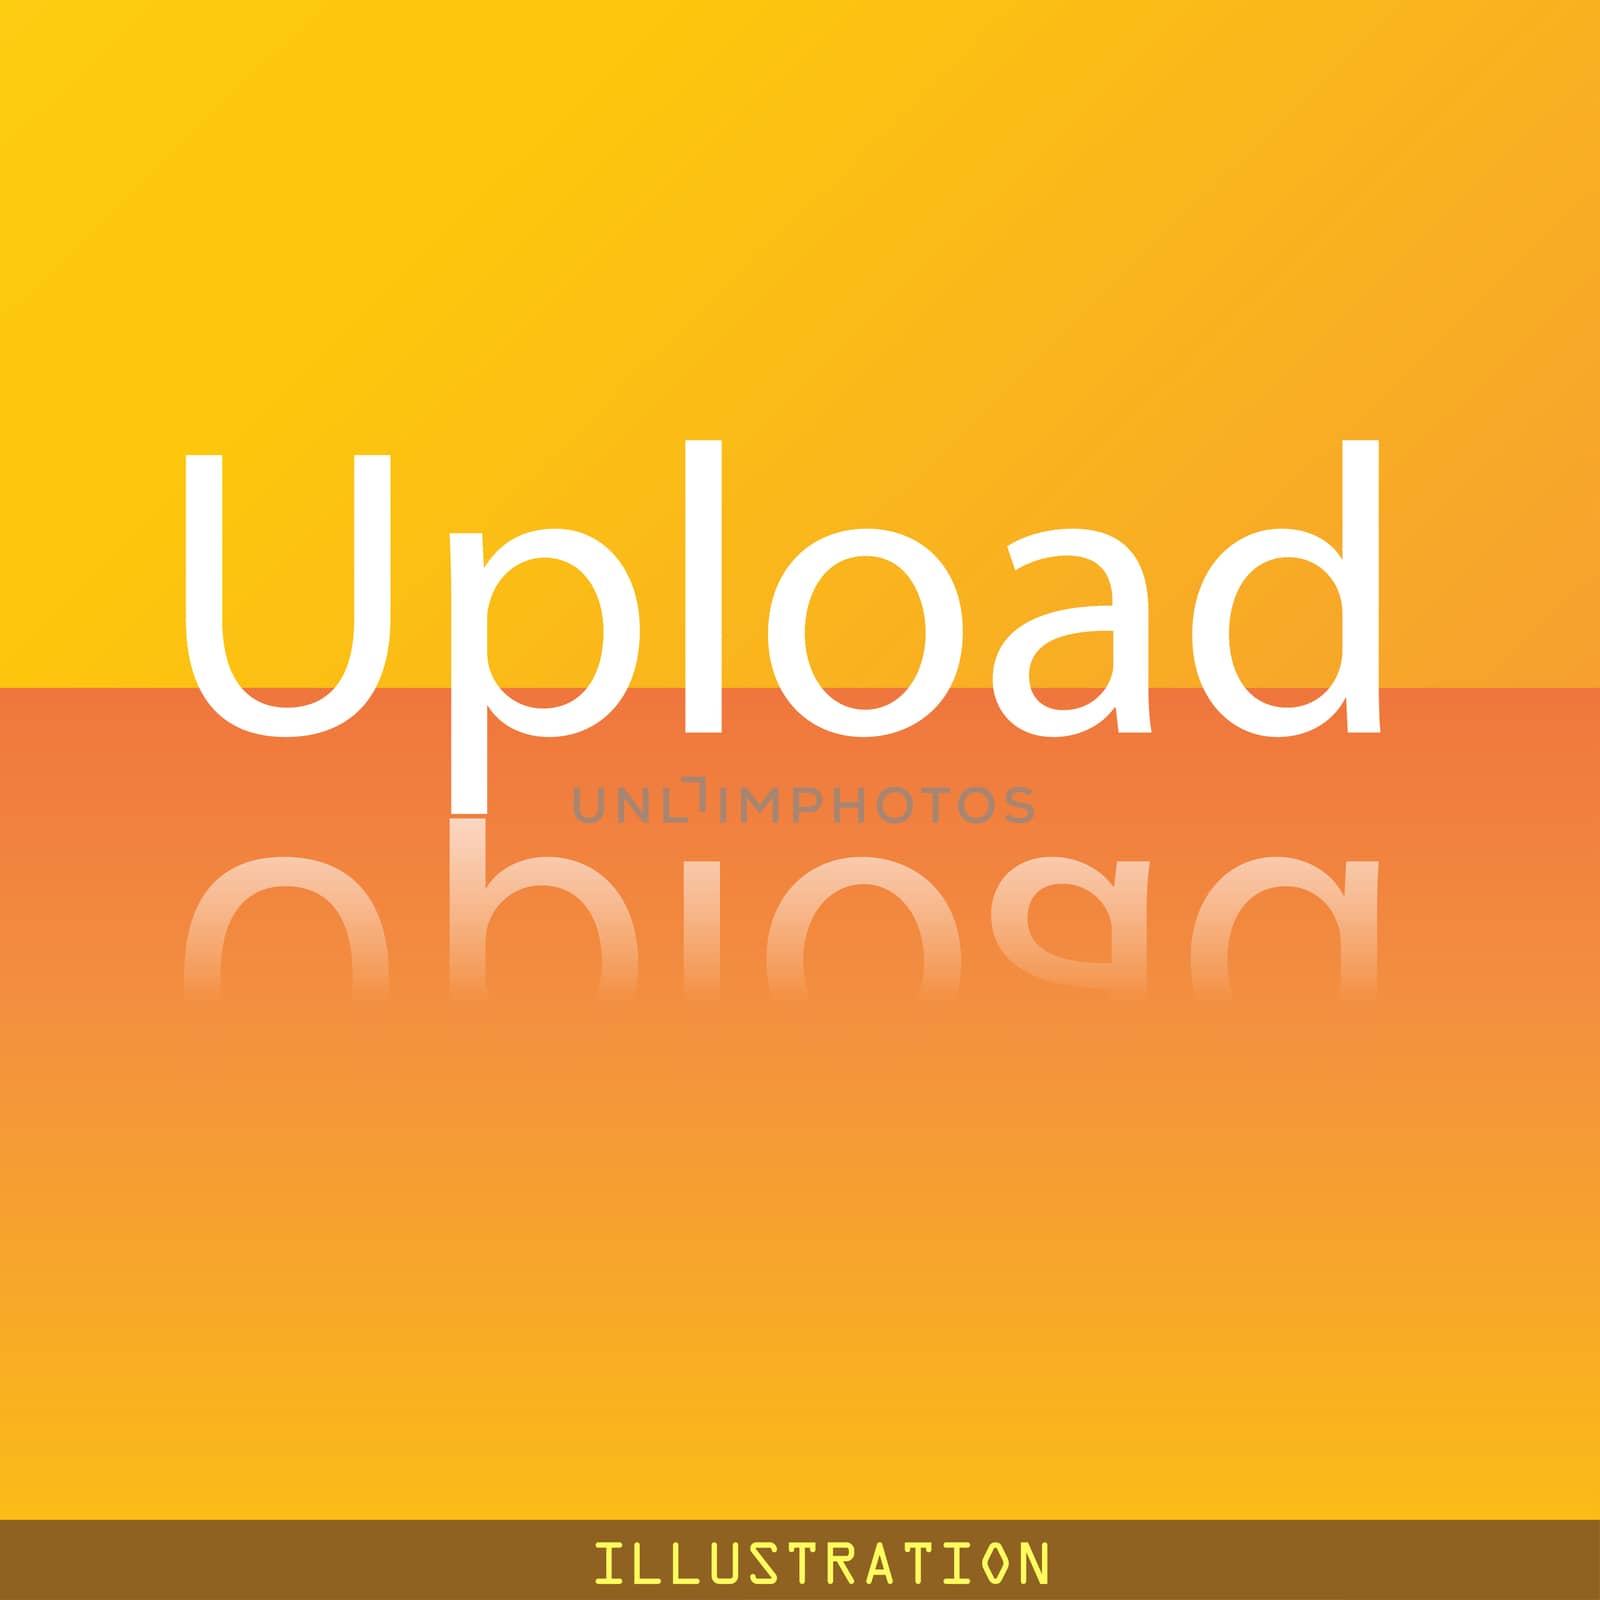 Upload icon symbol Flat modern web design with reflection and space for your text. illustration. Raster version